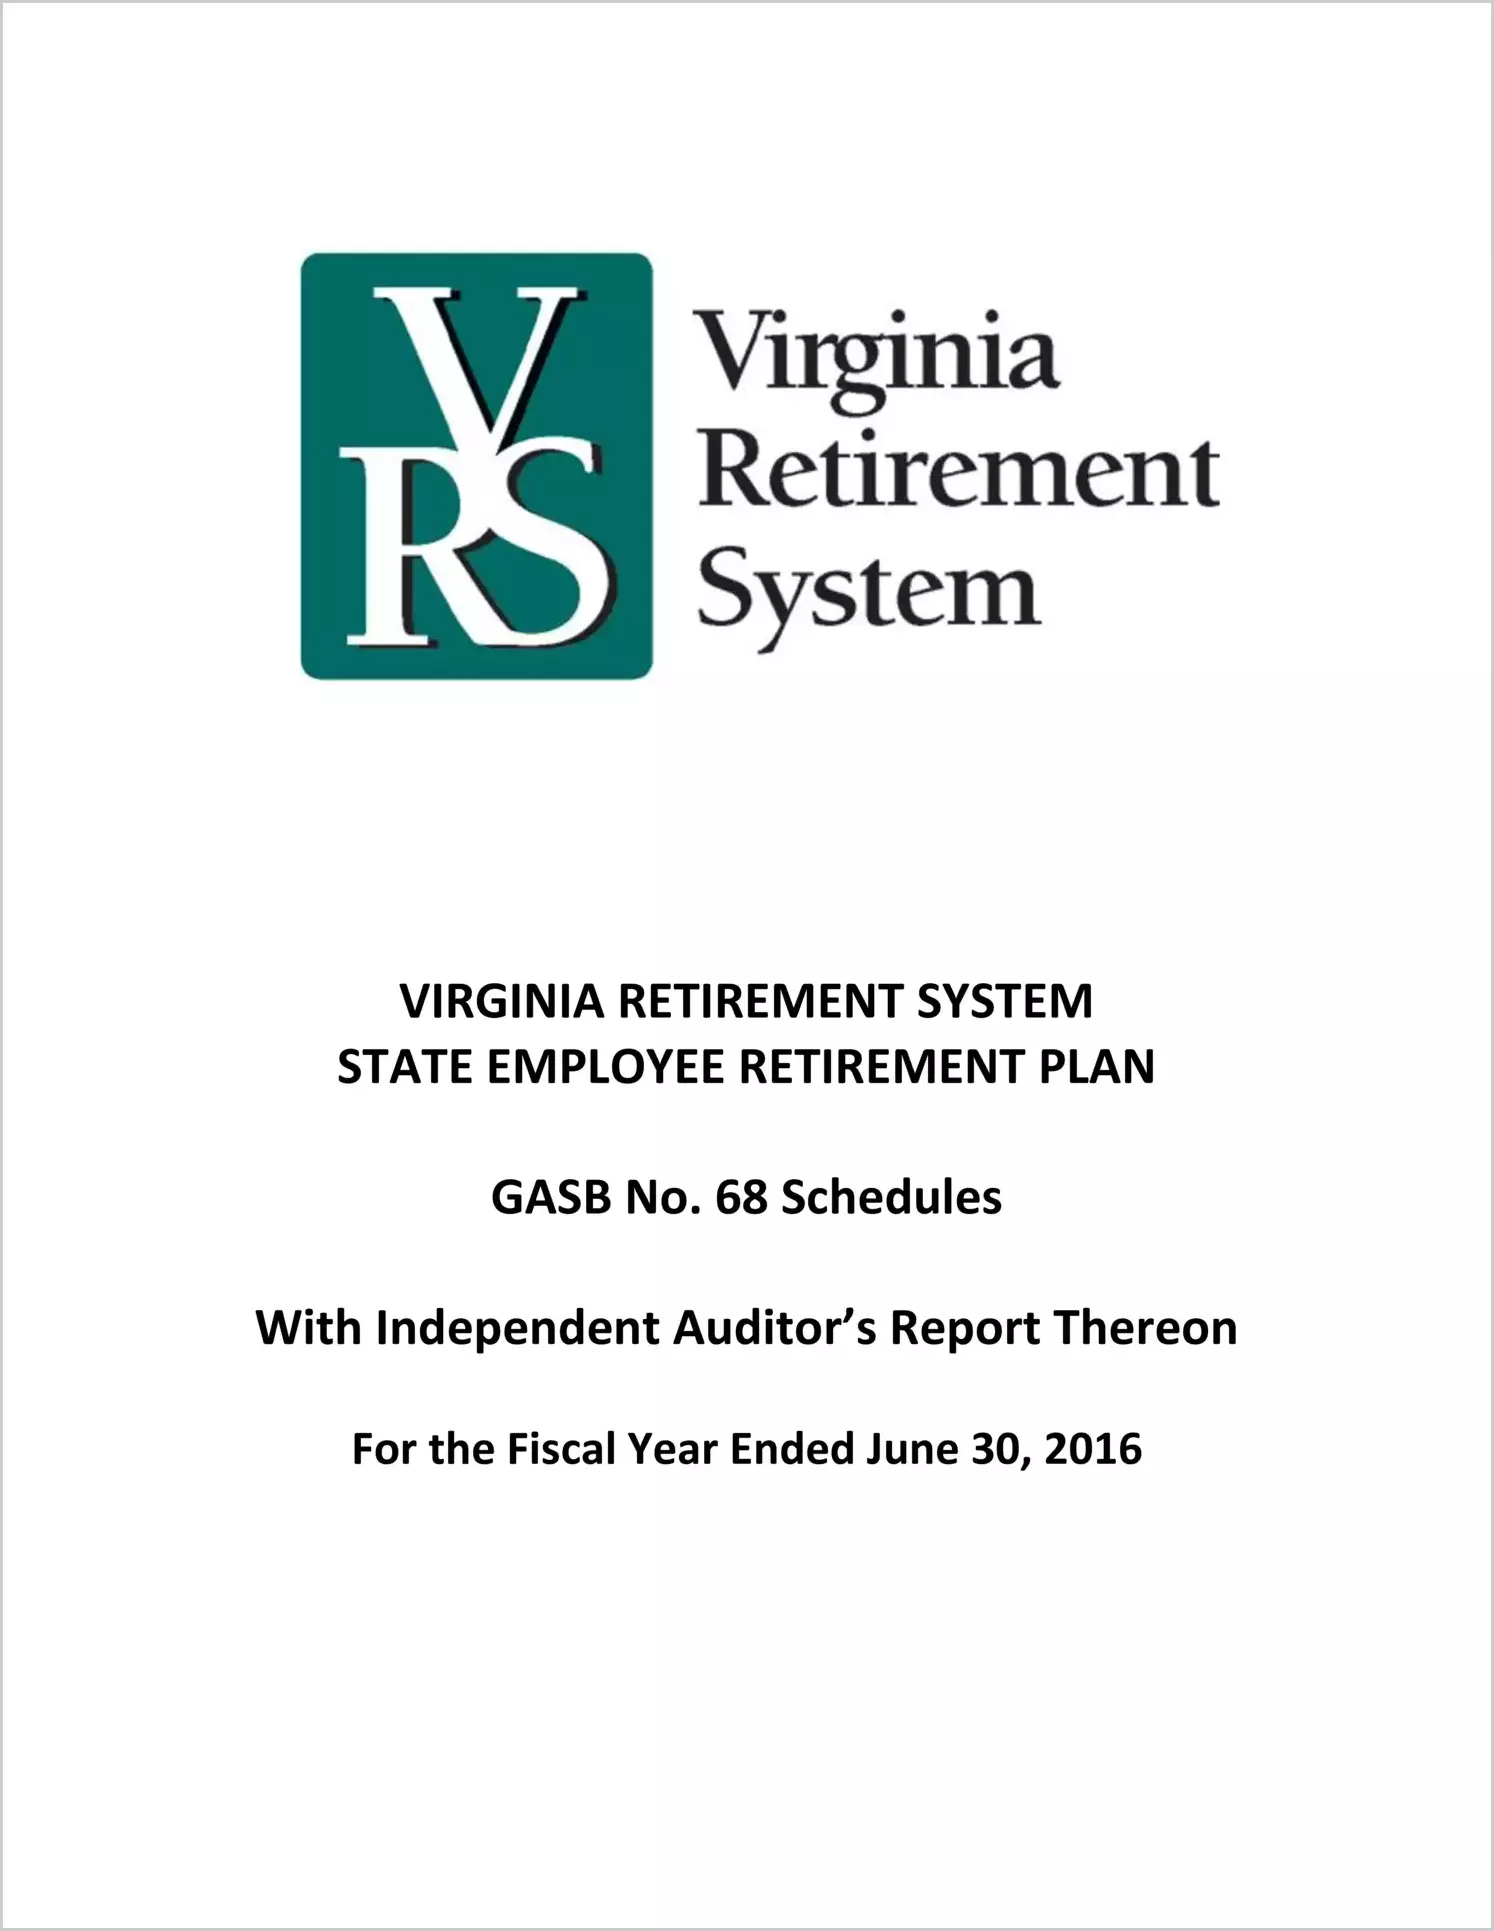 GASB 68 Schedule - State Employee Retirement Plan for the year ended June 30, 2016